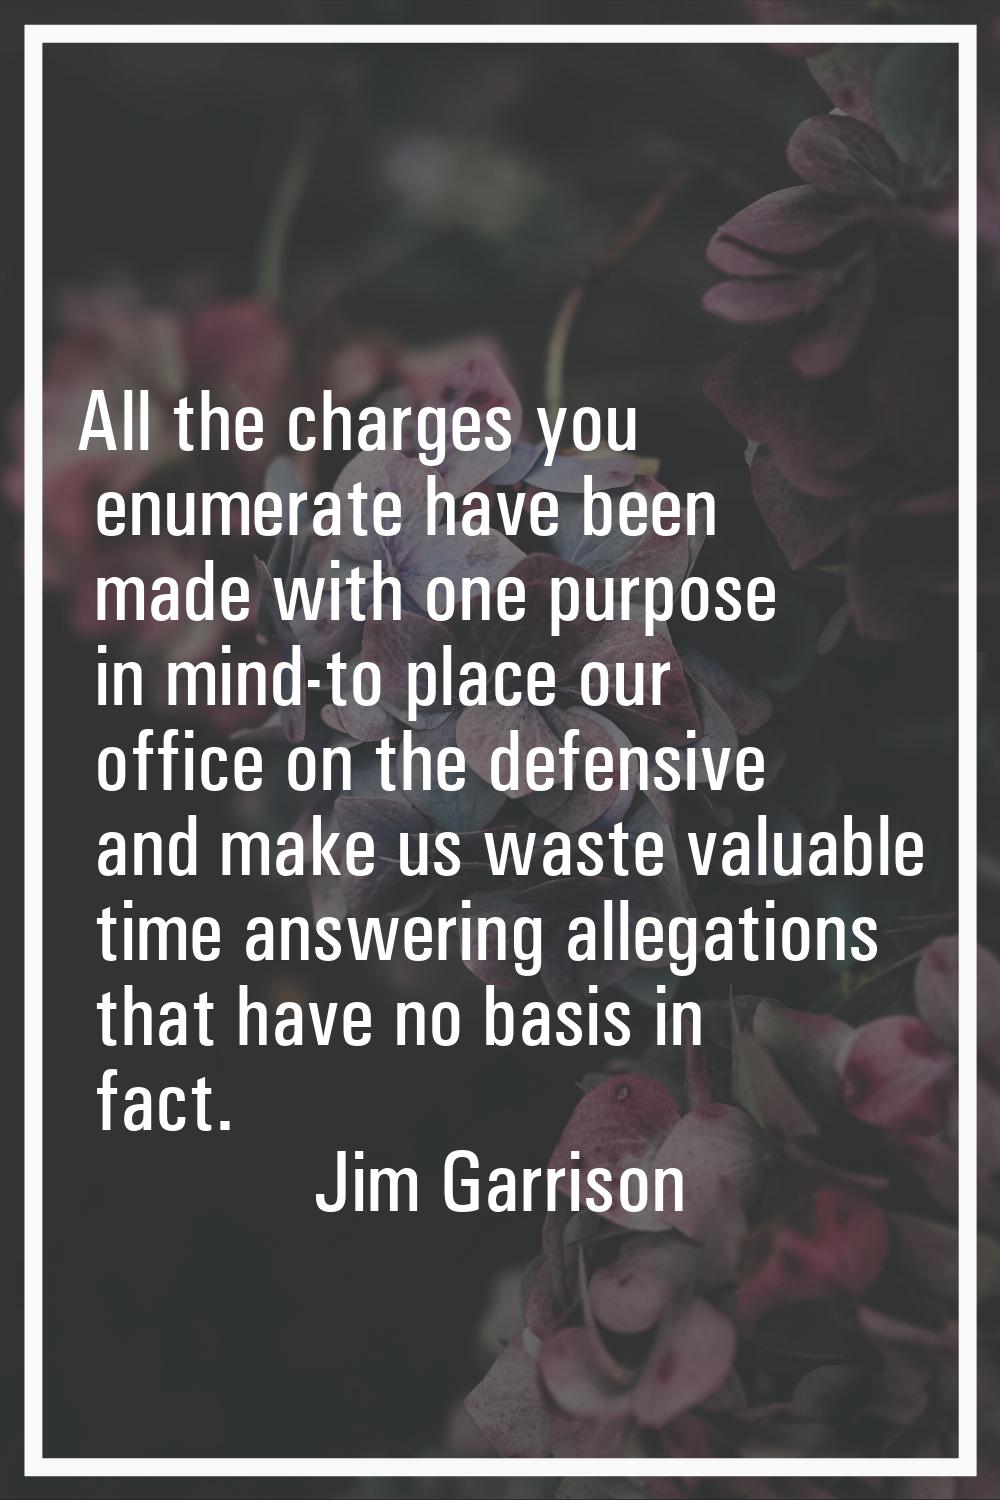 All the charges you enumerate have been made with one purpose in mind-to place our office on the de